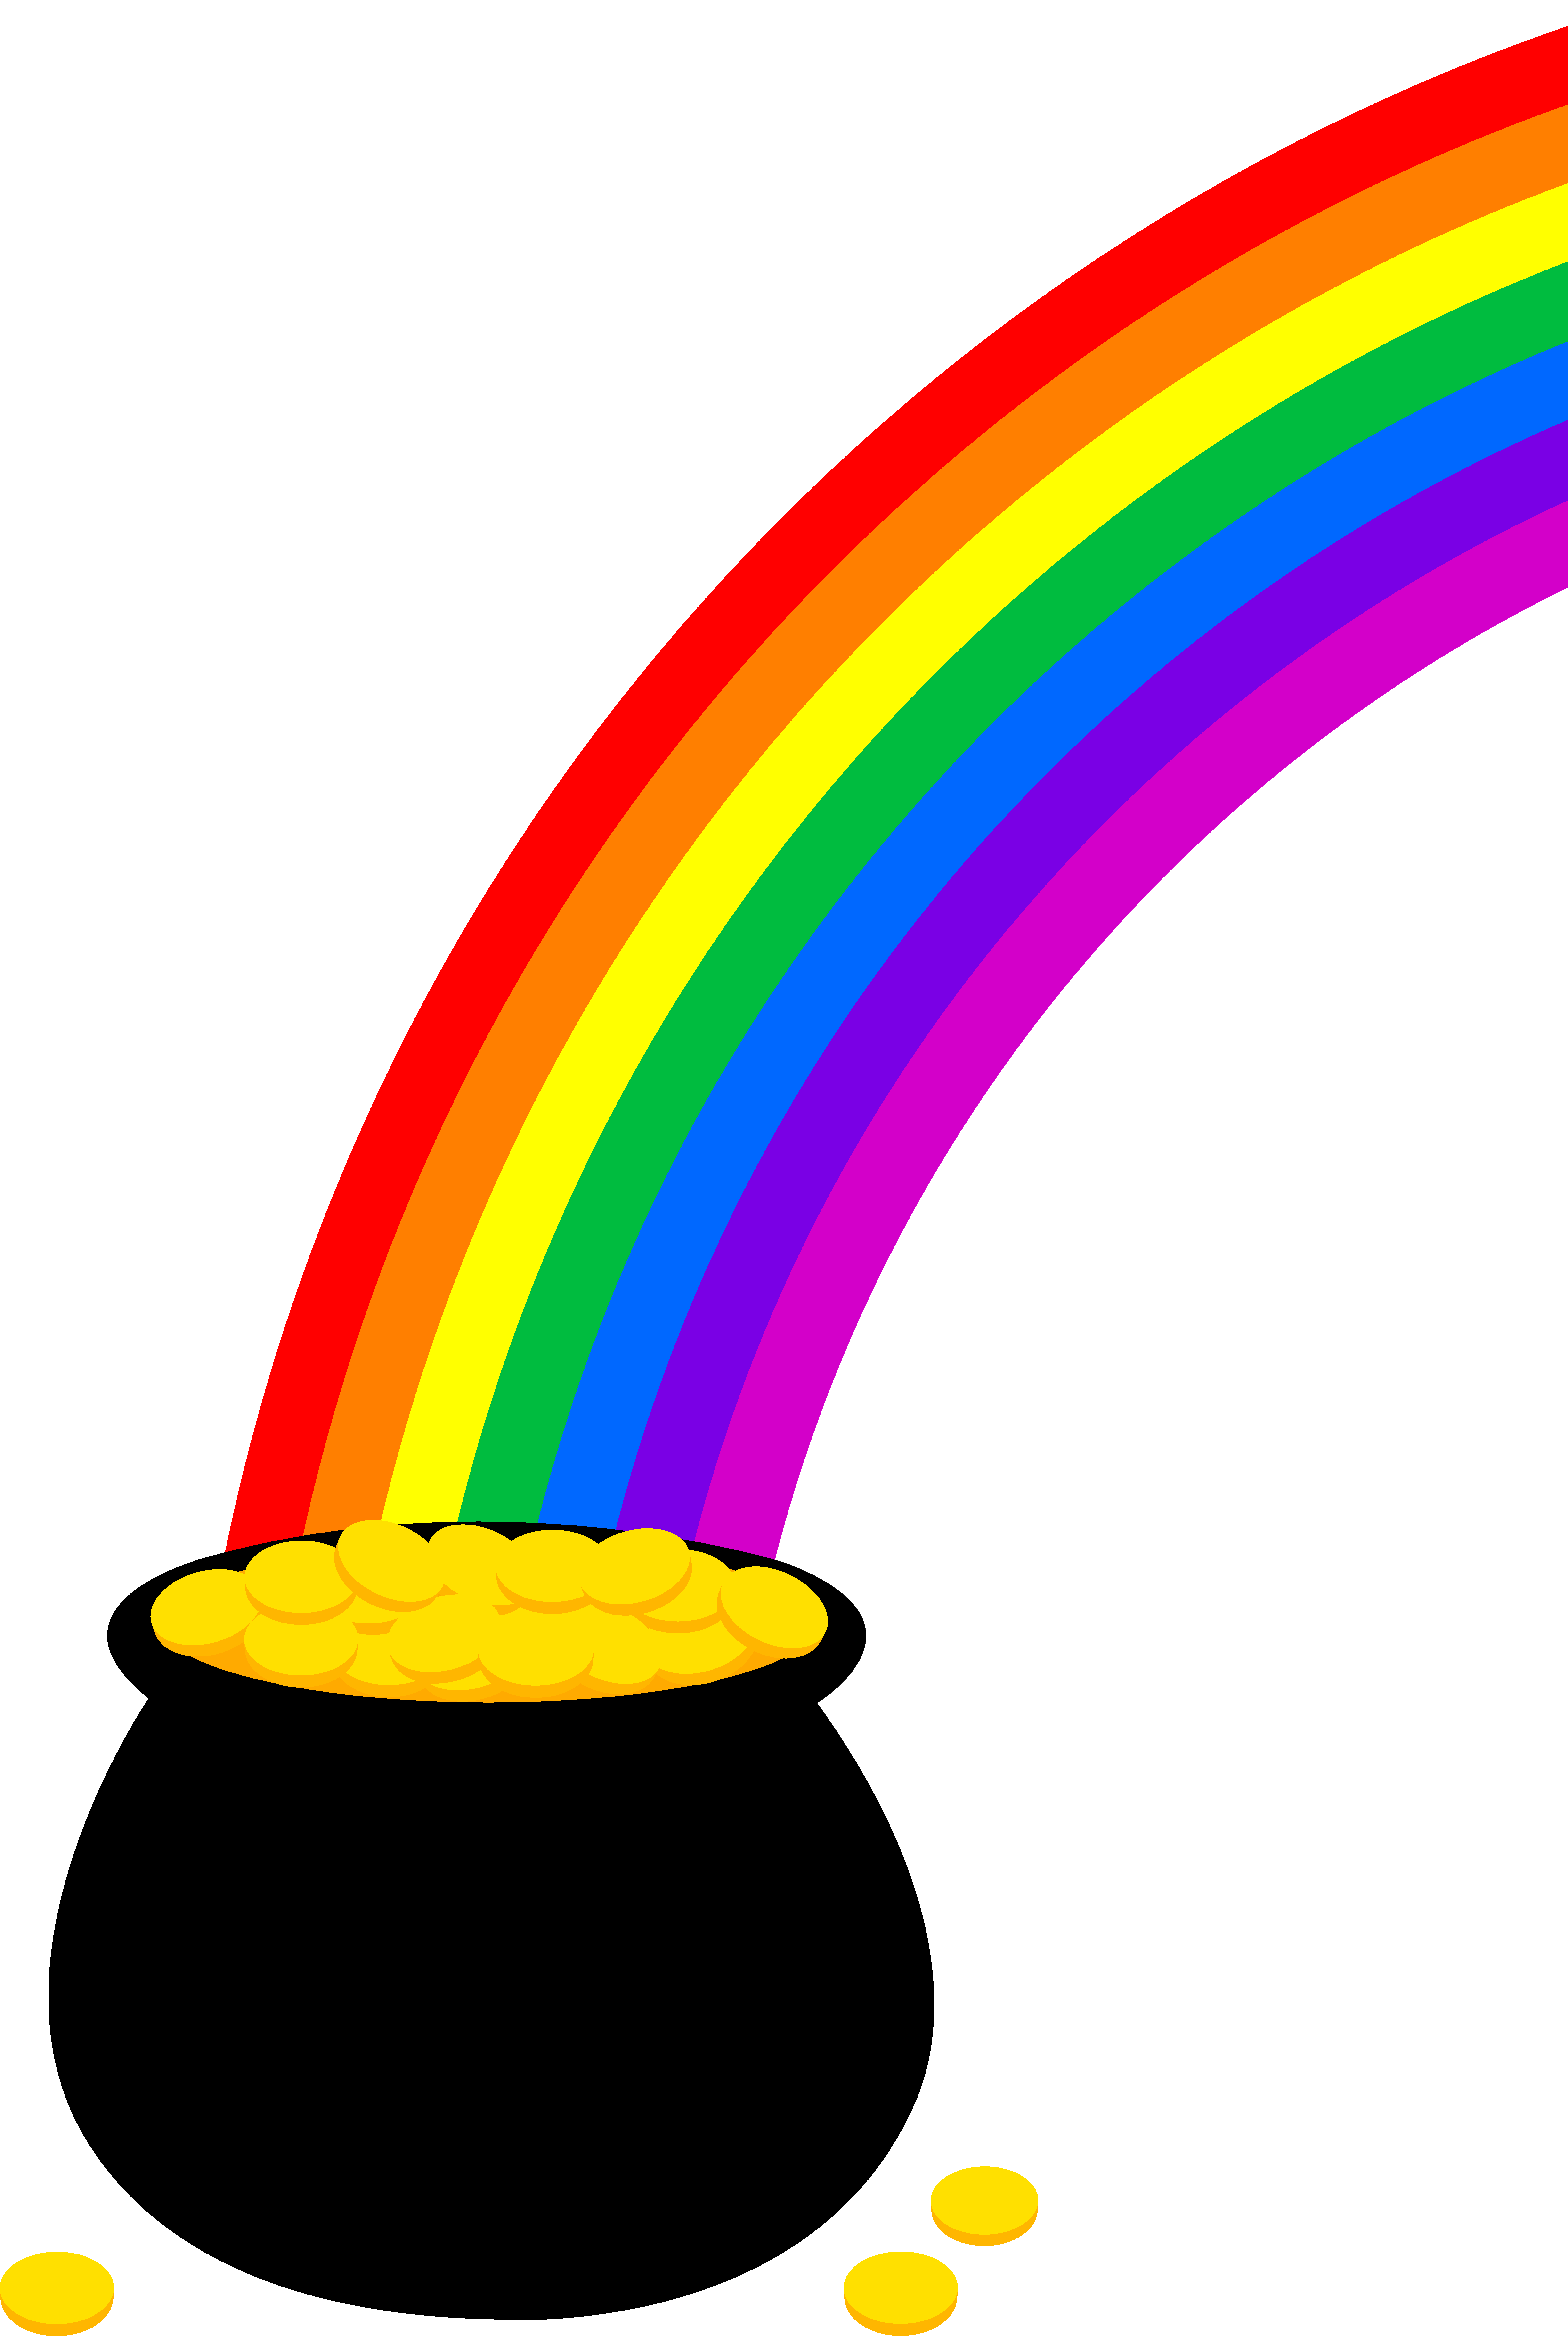 Rainbow Pot Gold Of Free HQ Image Clipart